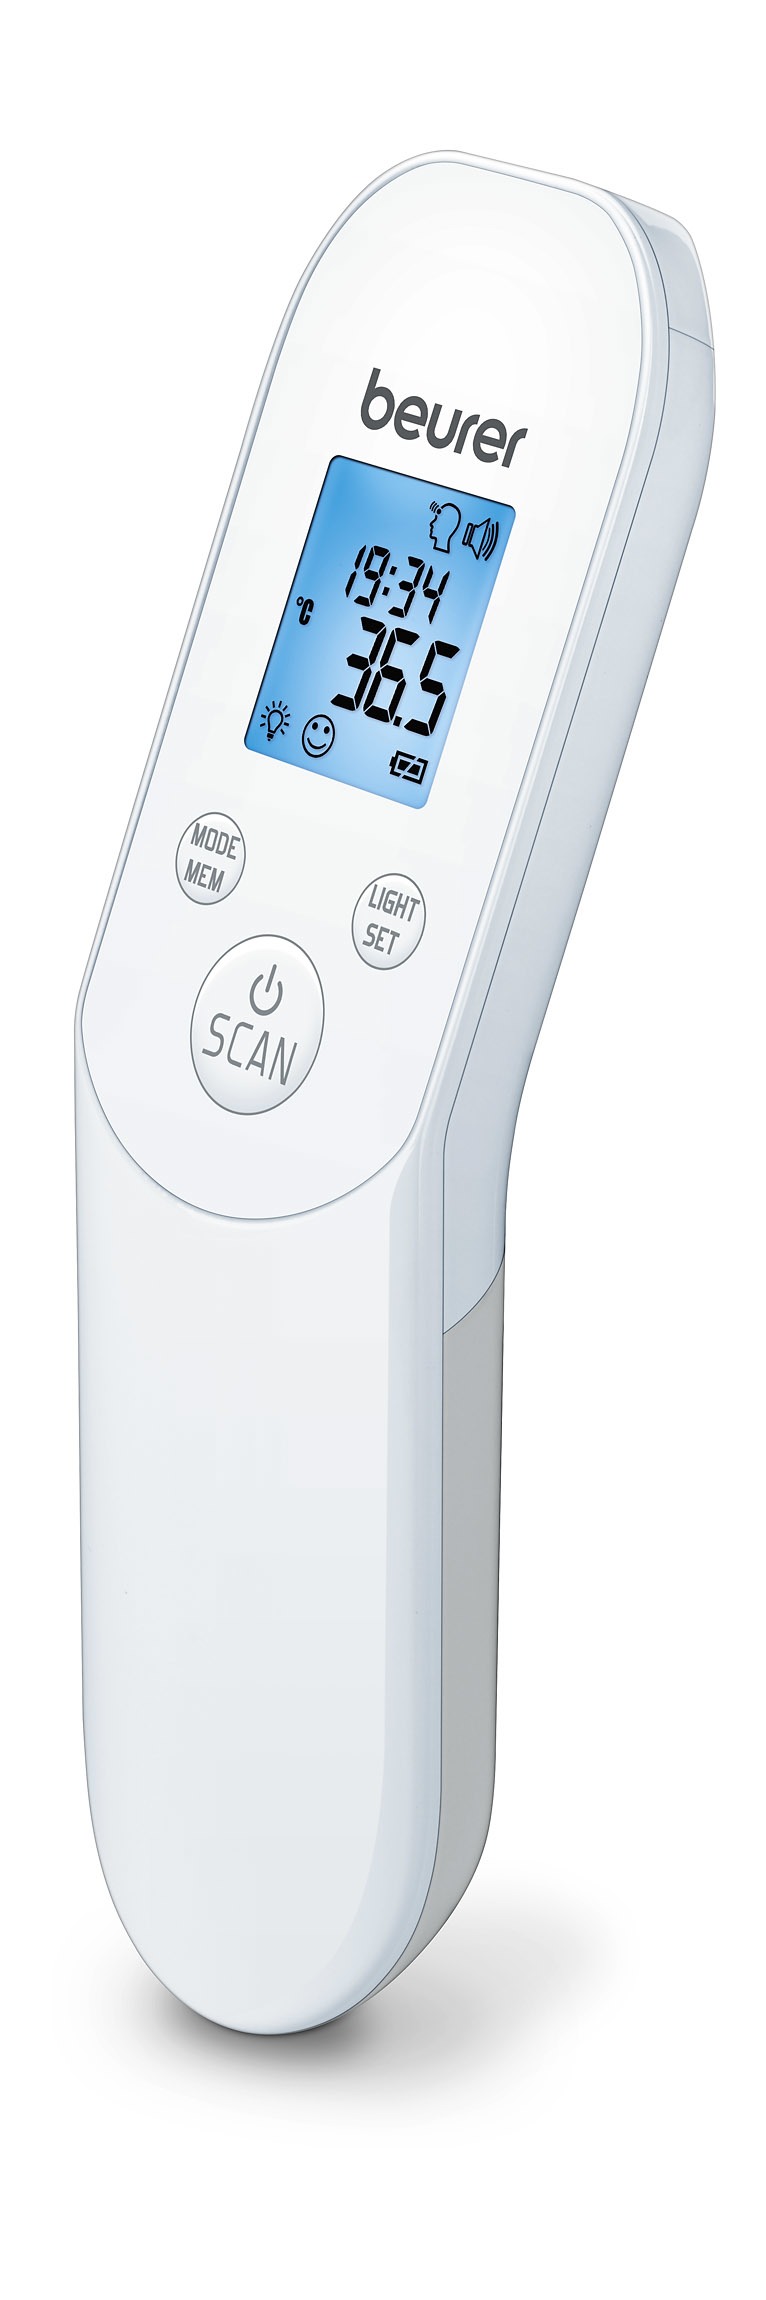 Beurer FT85 Digitale thermometer Wit